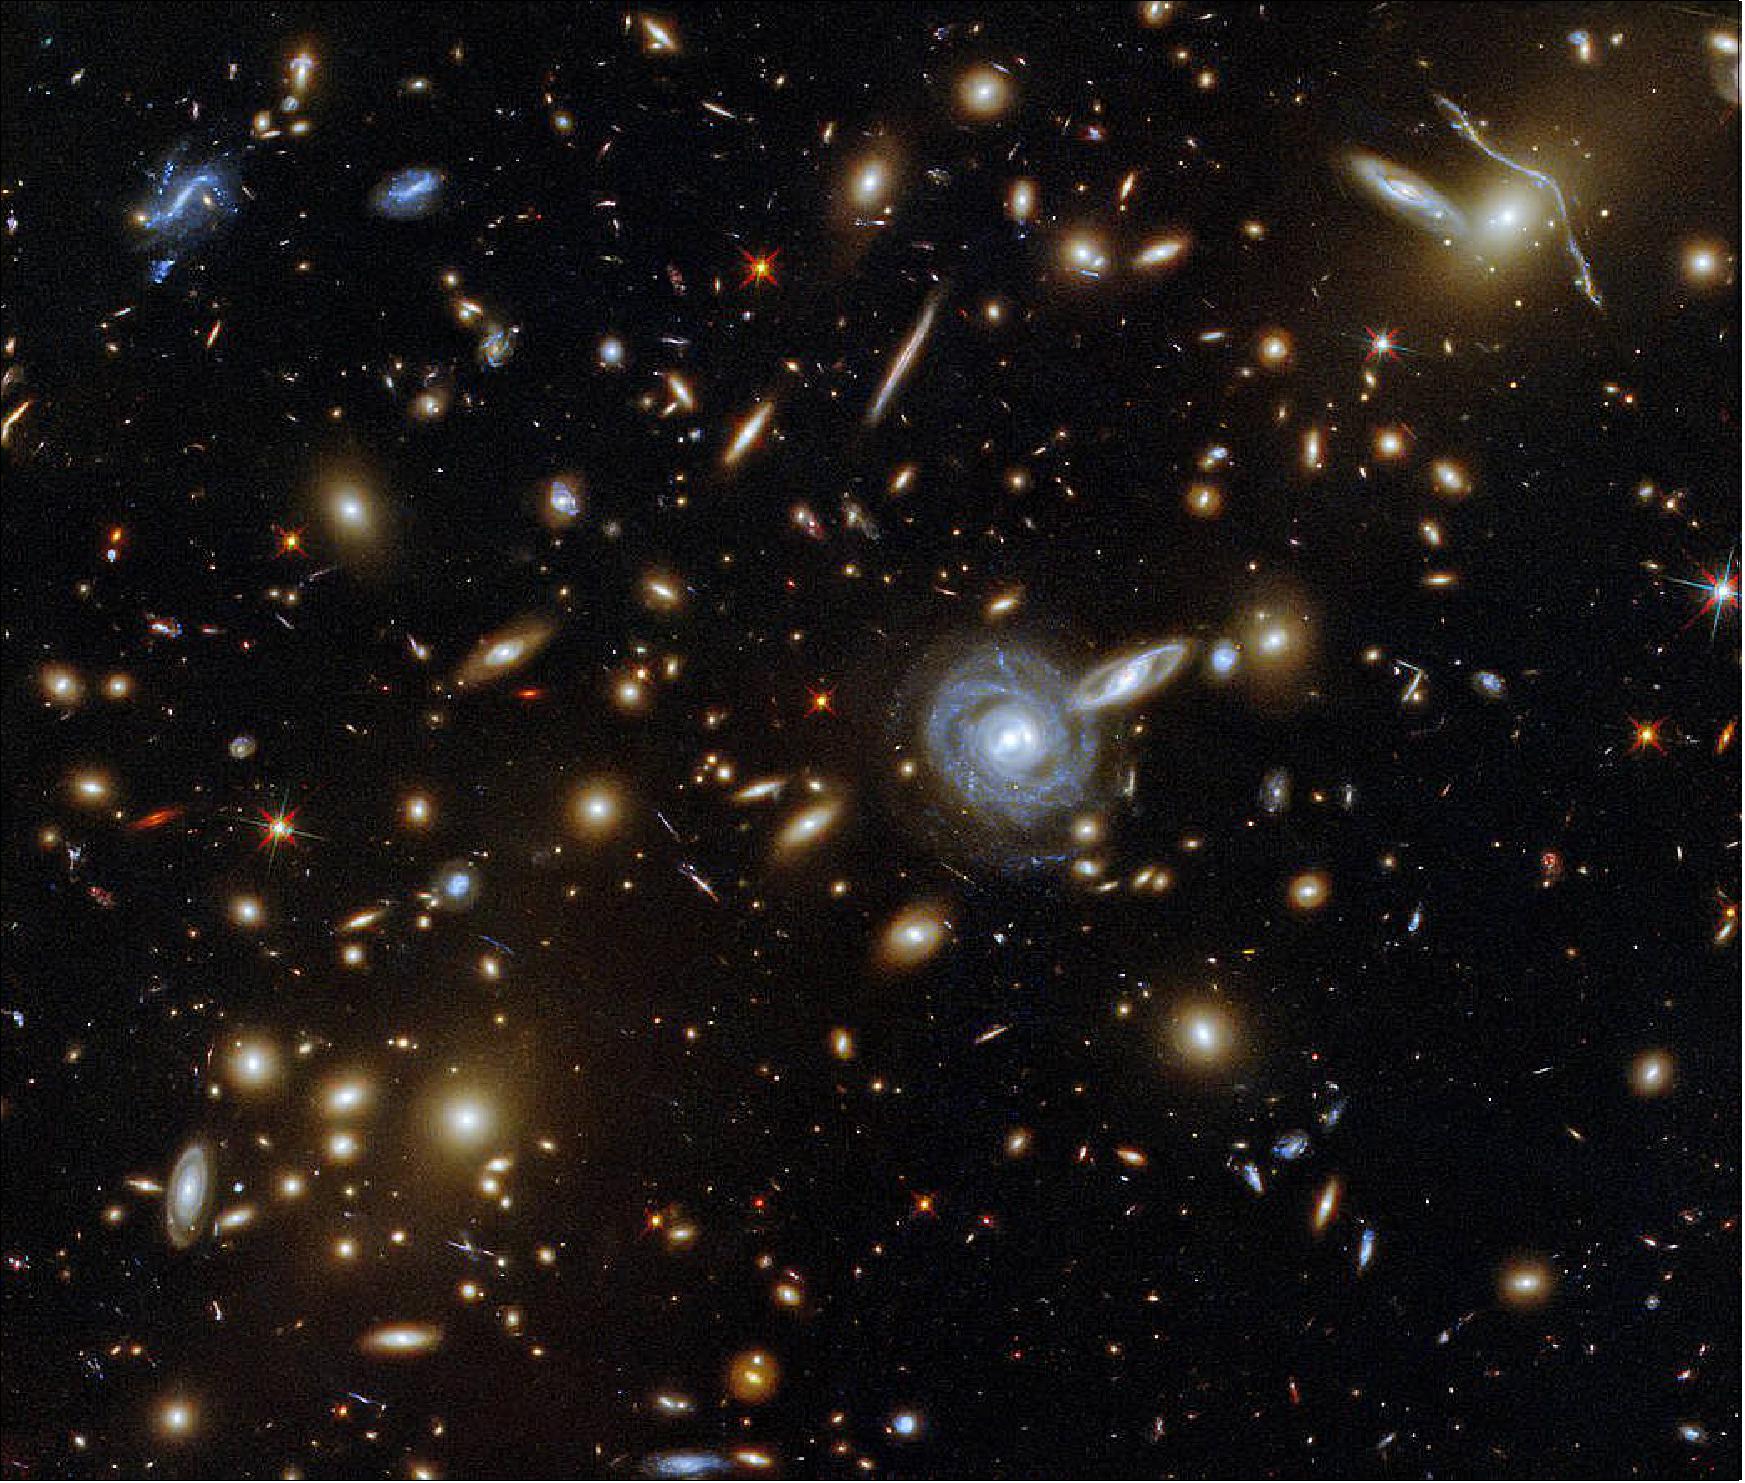 Figure 85: This packed ESA/Hubble Picture of the Week showcases the galaxy cluster ACO S 295, as well as a jostling crowd of background galaxies and foreground stars. Galaxies of all shapes and sizes populate this image, ranging from stately spirals to fuzzy ellipticals. As well as a range of sizes, this galactic menagerie boasts a range of orientations, with spiral galaxies such as the one at the centre of this image appearing almost face on, and some edge-on spiral galaxies visible only as thin slivers of light (image credit: ESA/Hubble & NASA, F. Pacaud, D. Coe; CC BY 4.0)